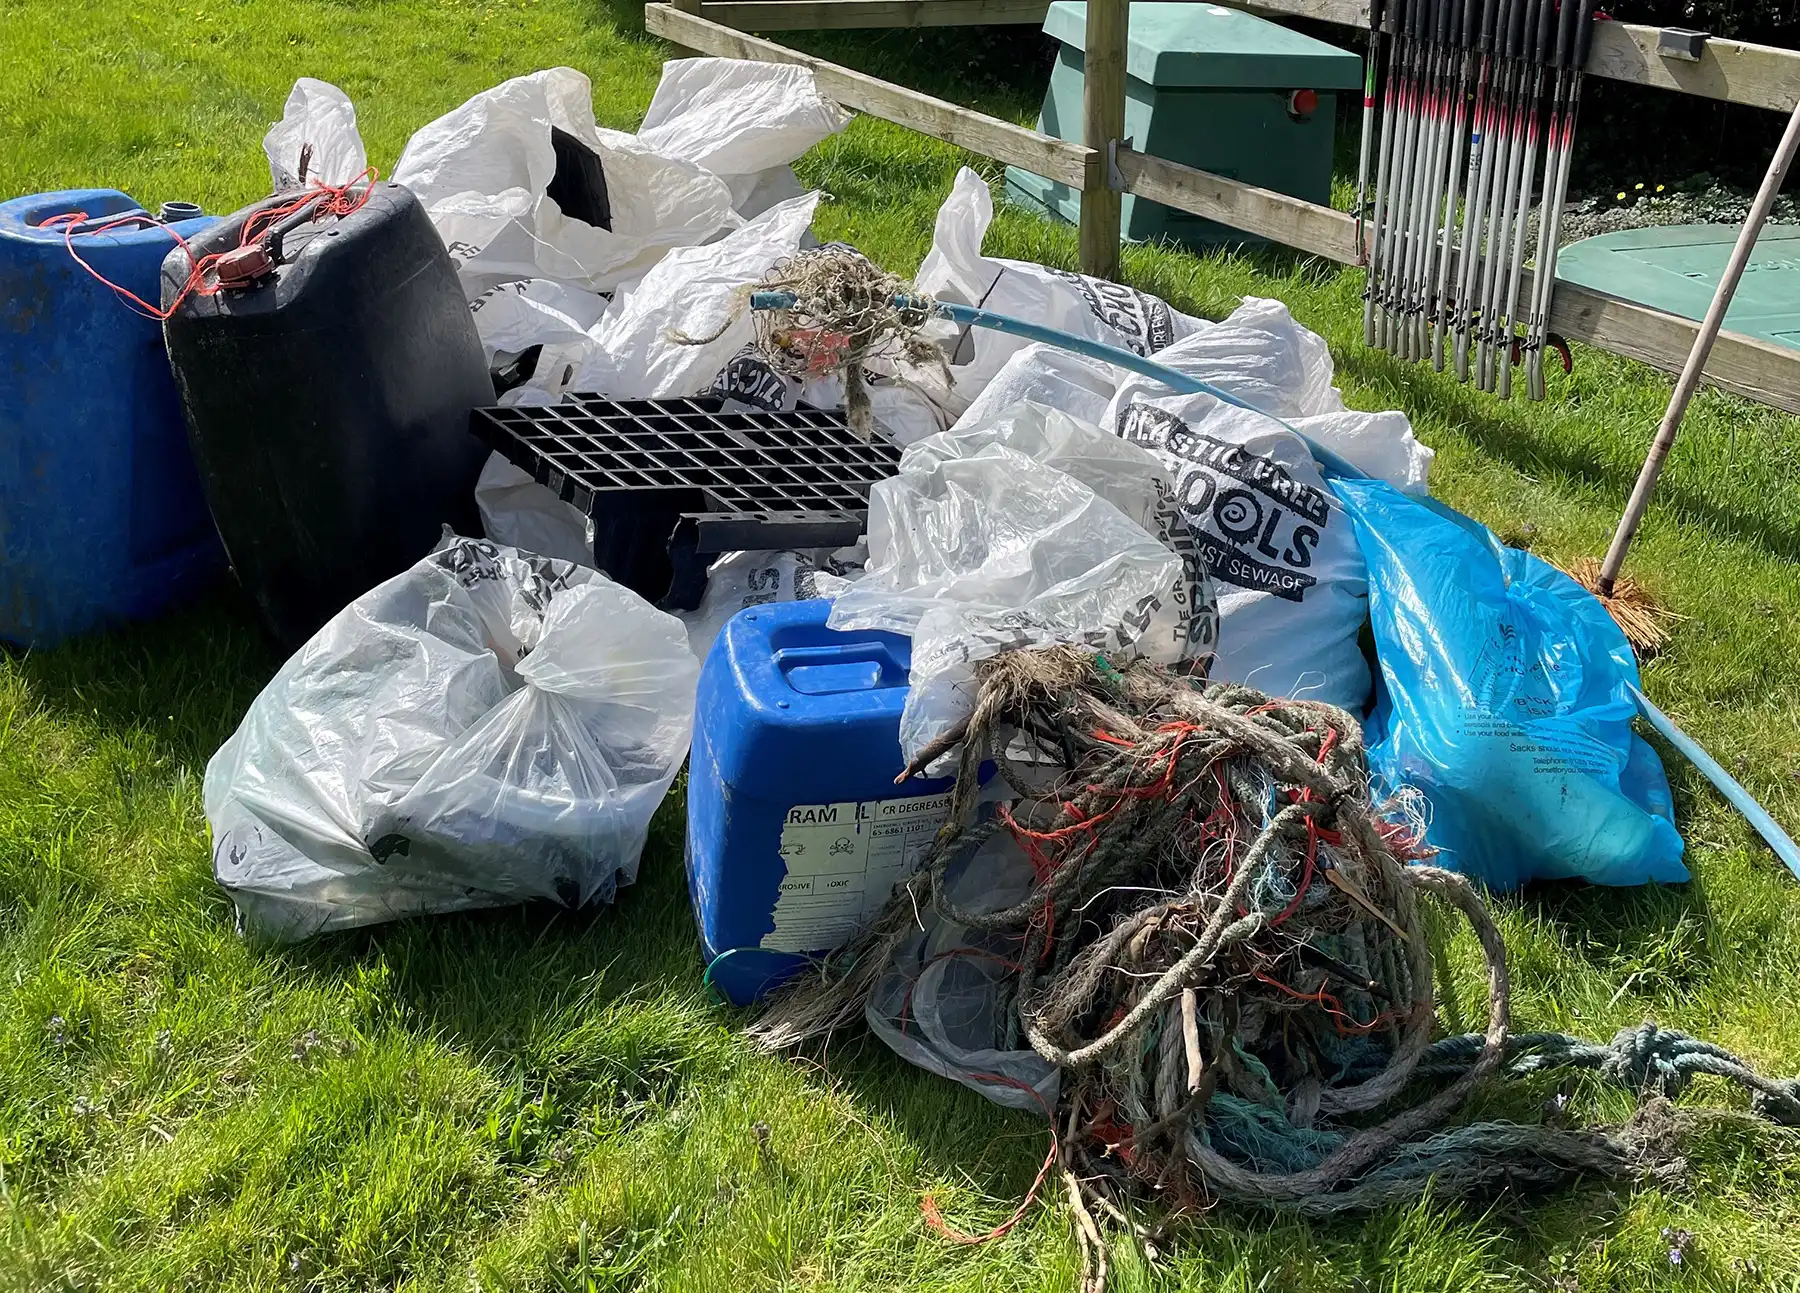 Just some of the litter collected at Kimmeridge Bay during the 34th Great Dorset Beach Clean